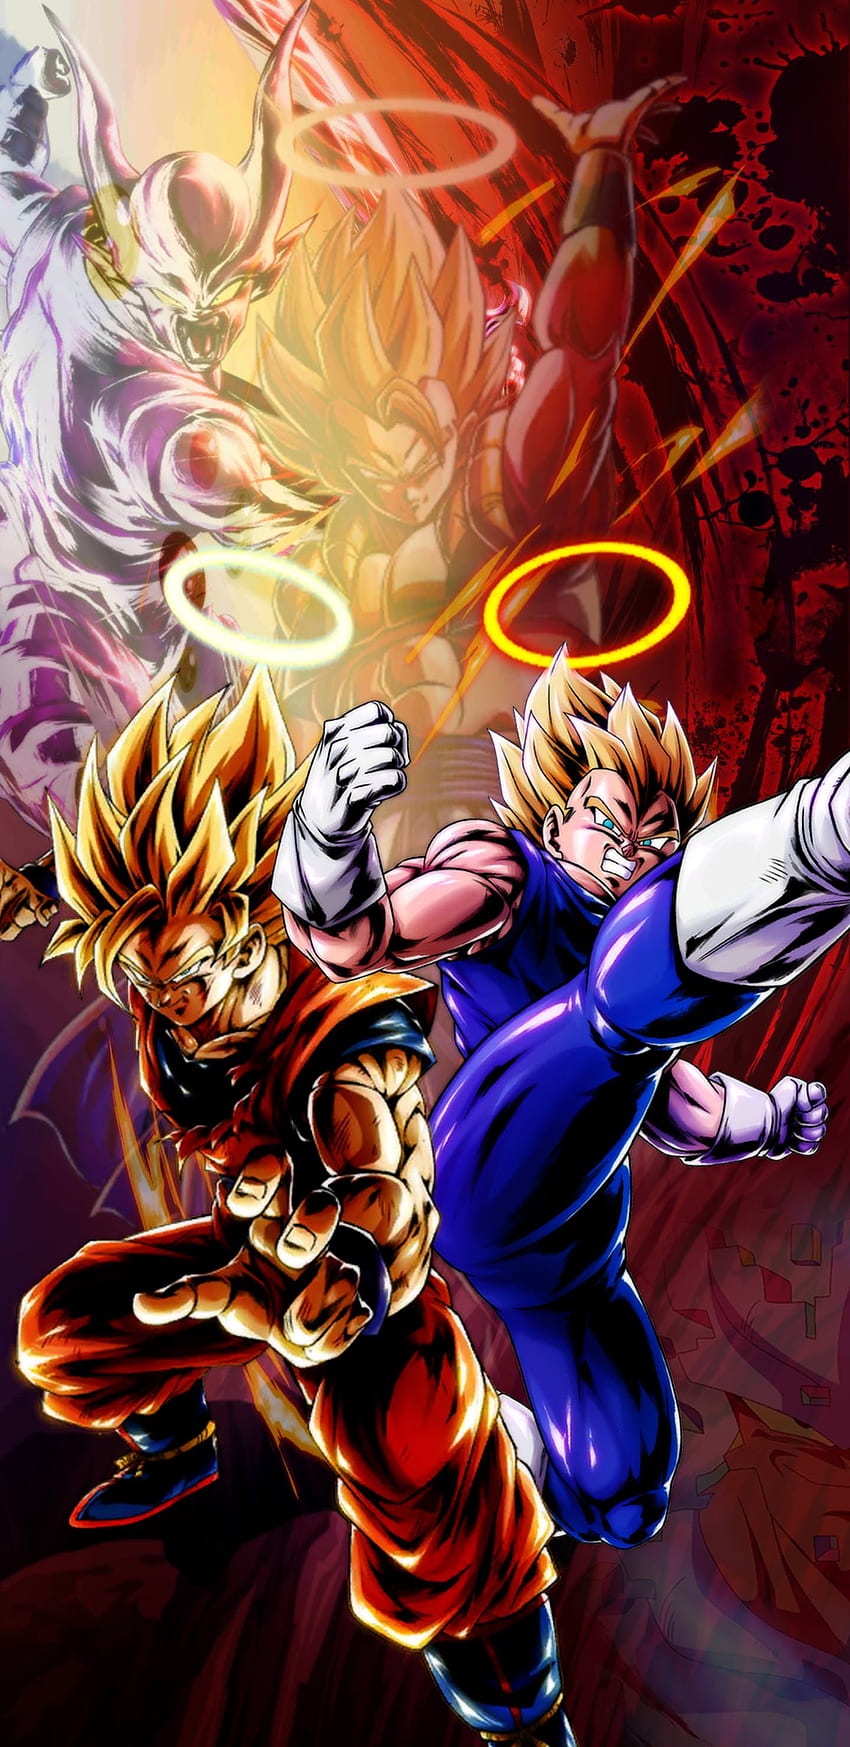 Figured I'd give it a shot at a with some of the legends, Gogeta and Vegito HD phone wallpaper